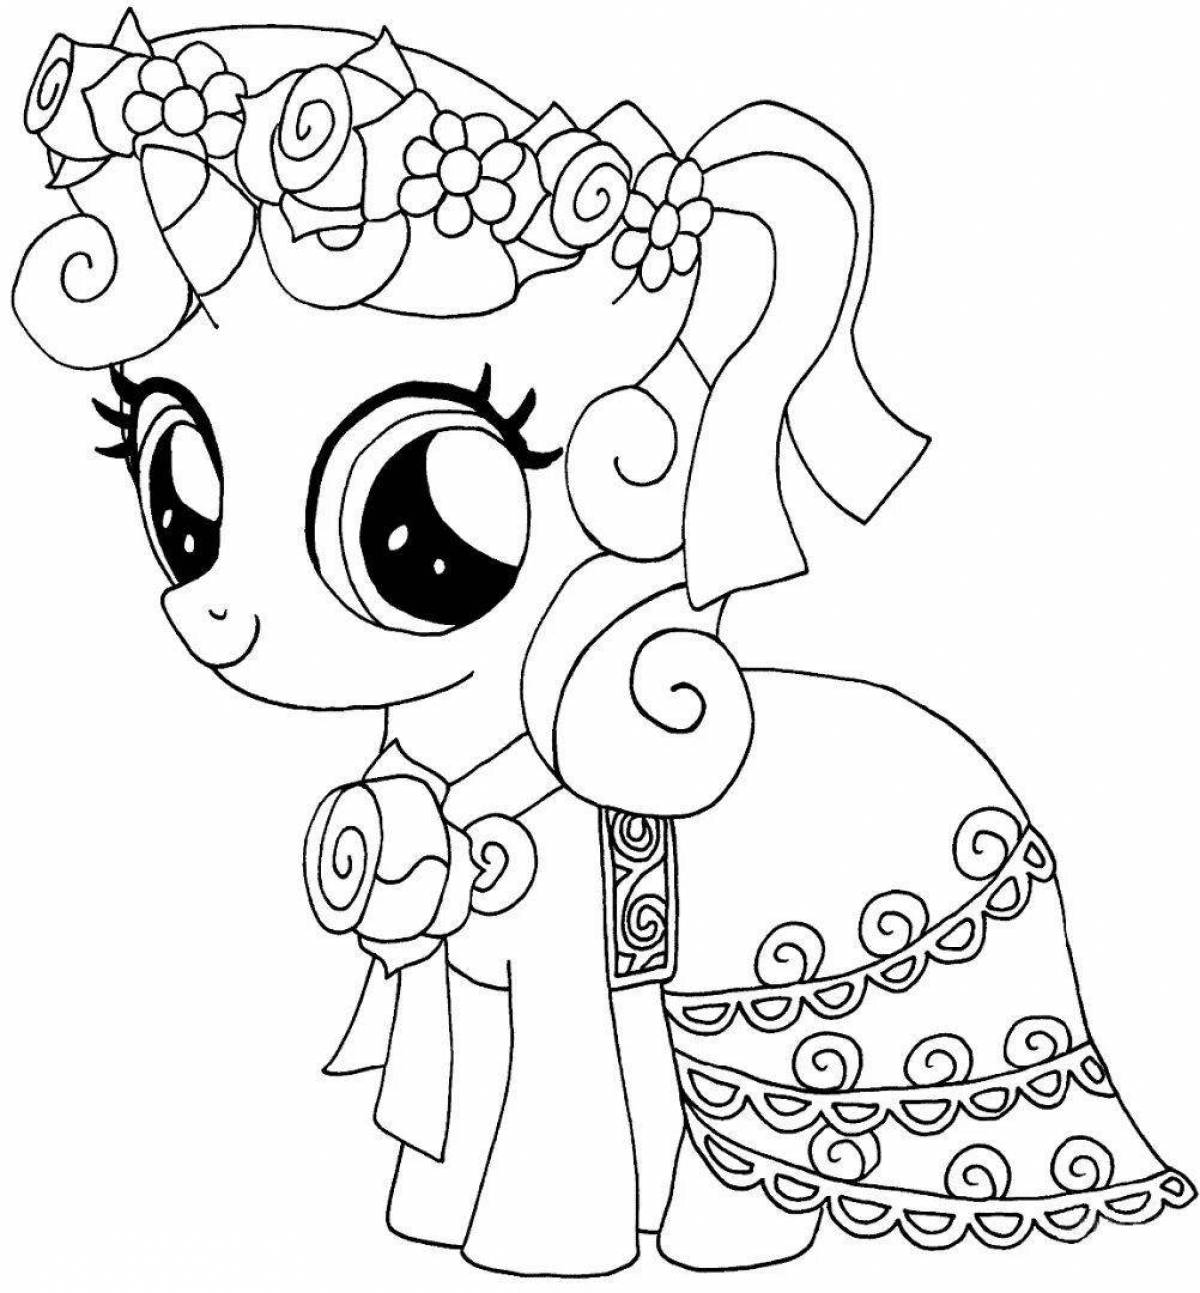 Great pony coloring